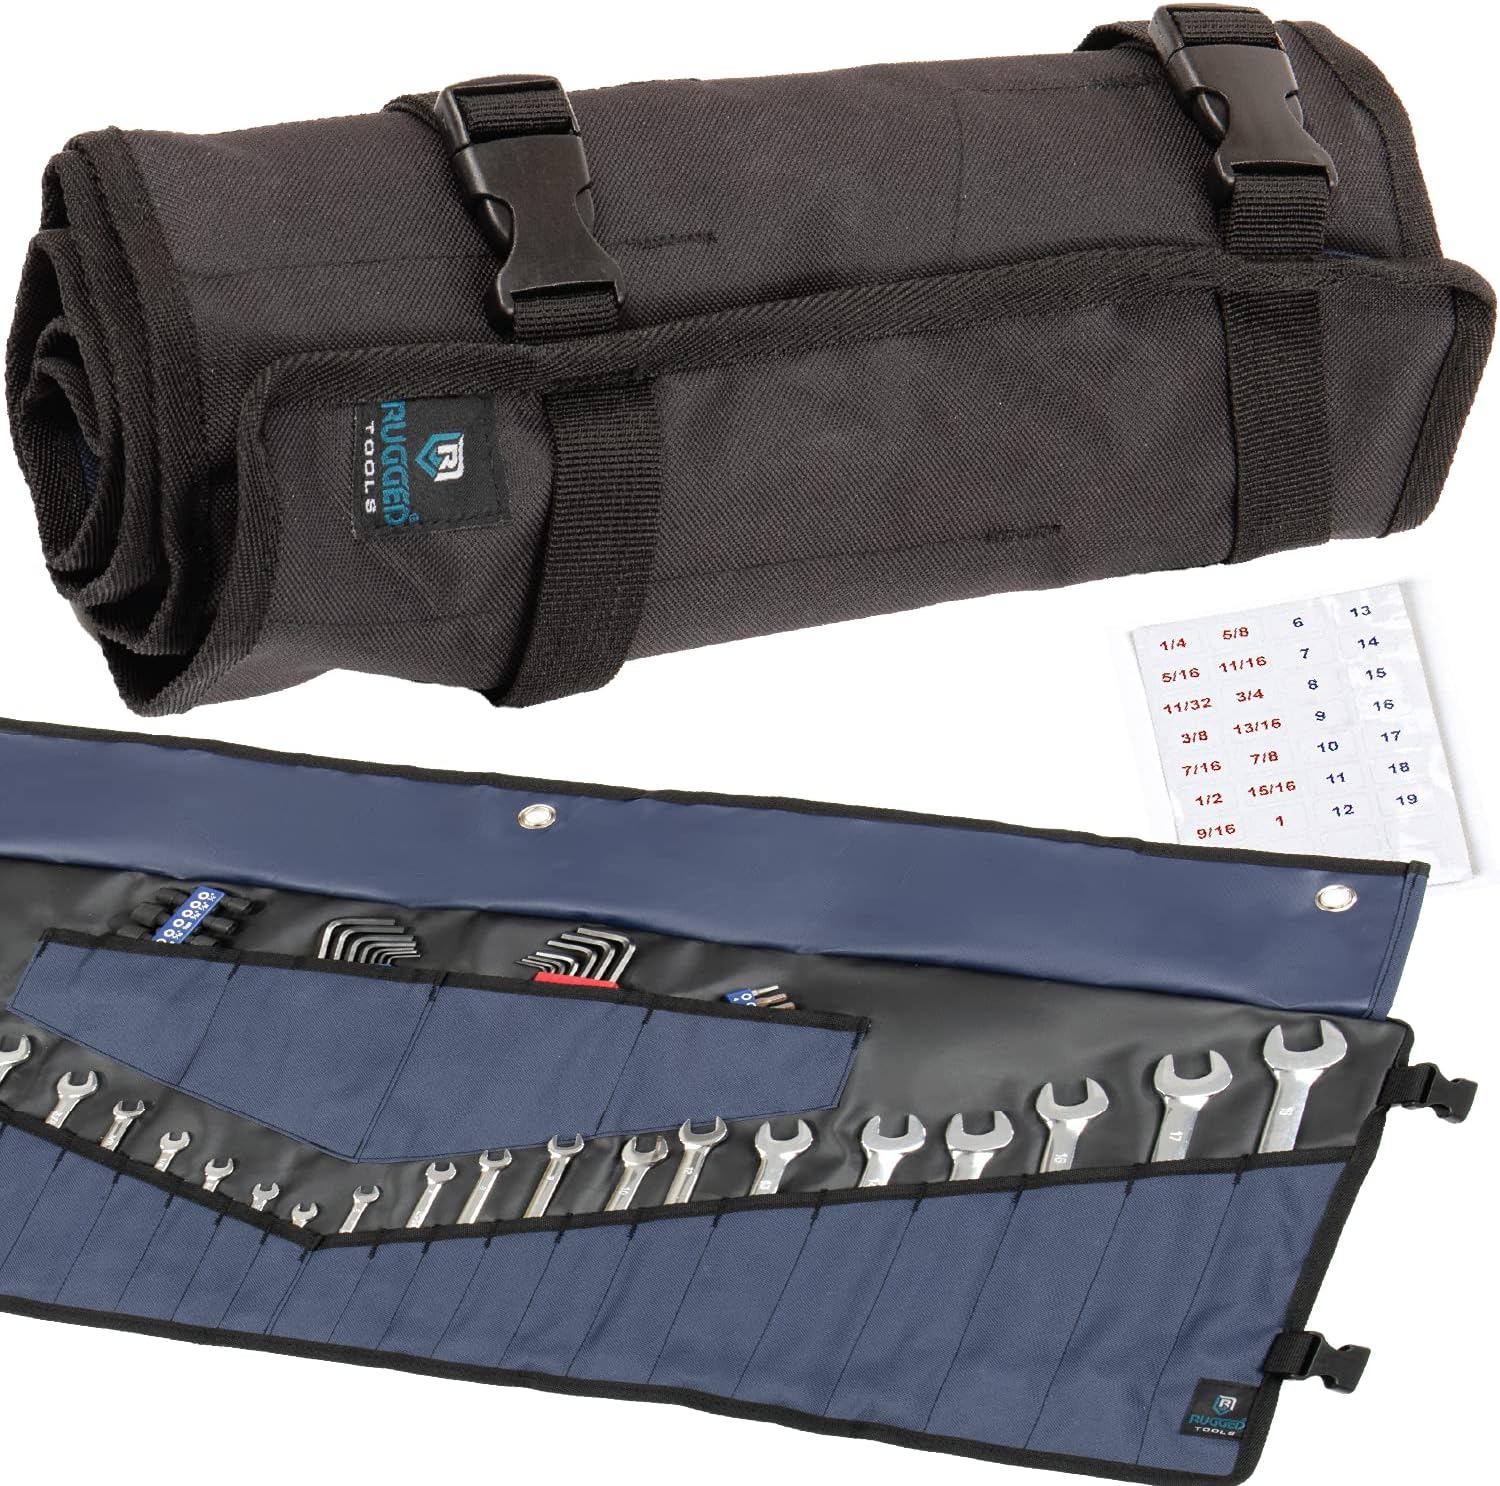 Rugged Tools Wrench Roll Up Pouch - Wrench Organizer